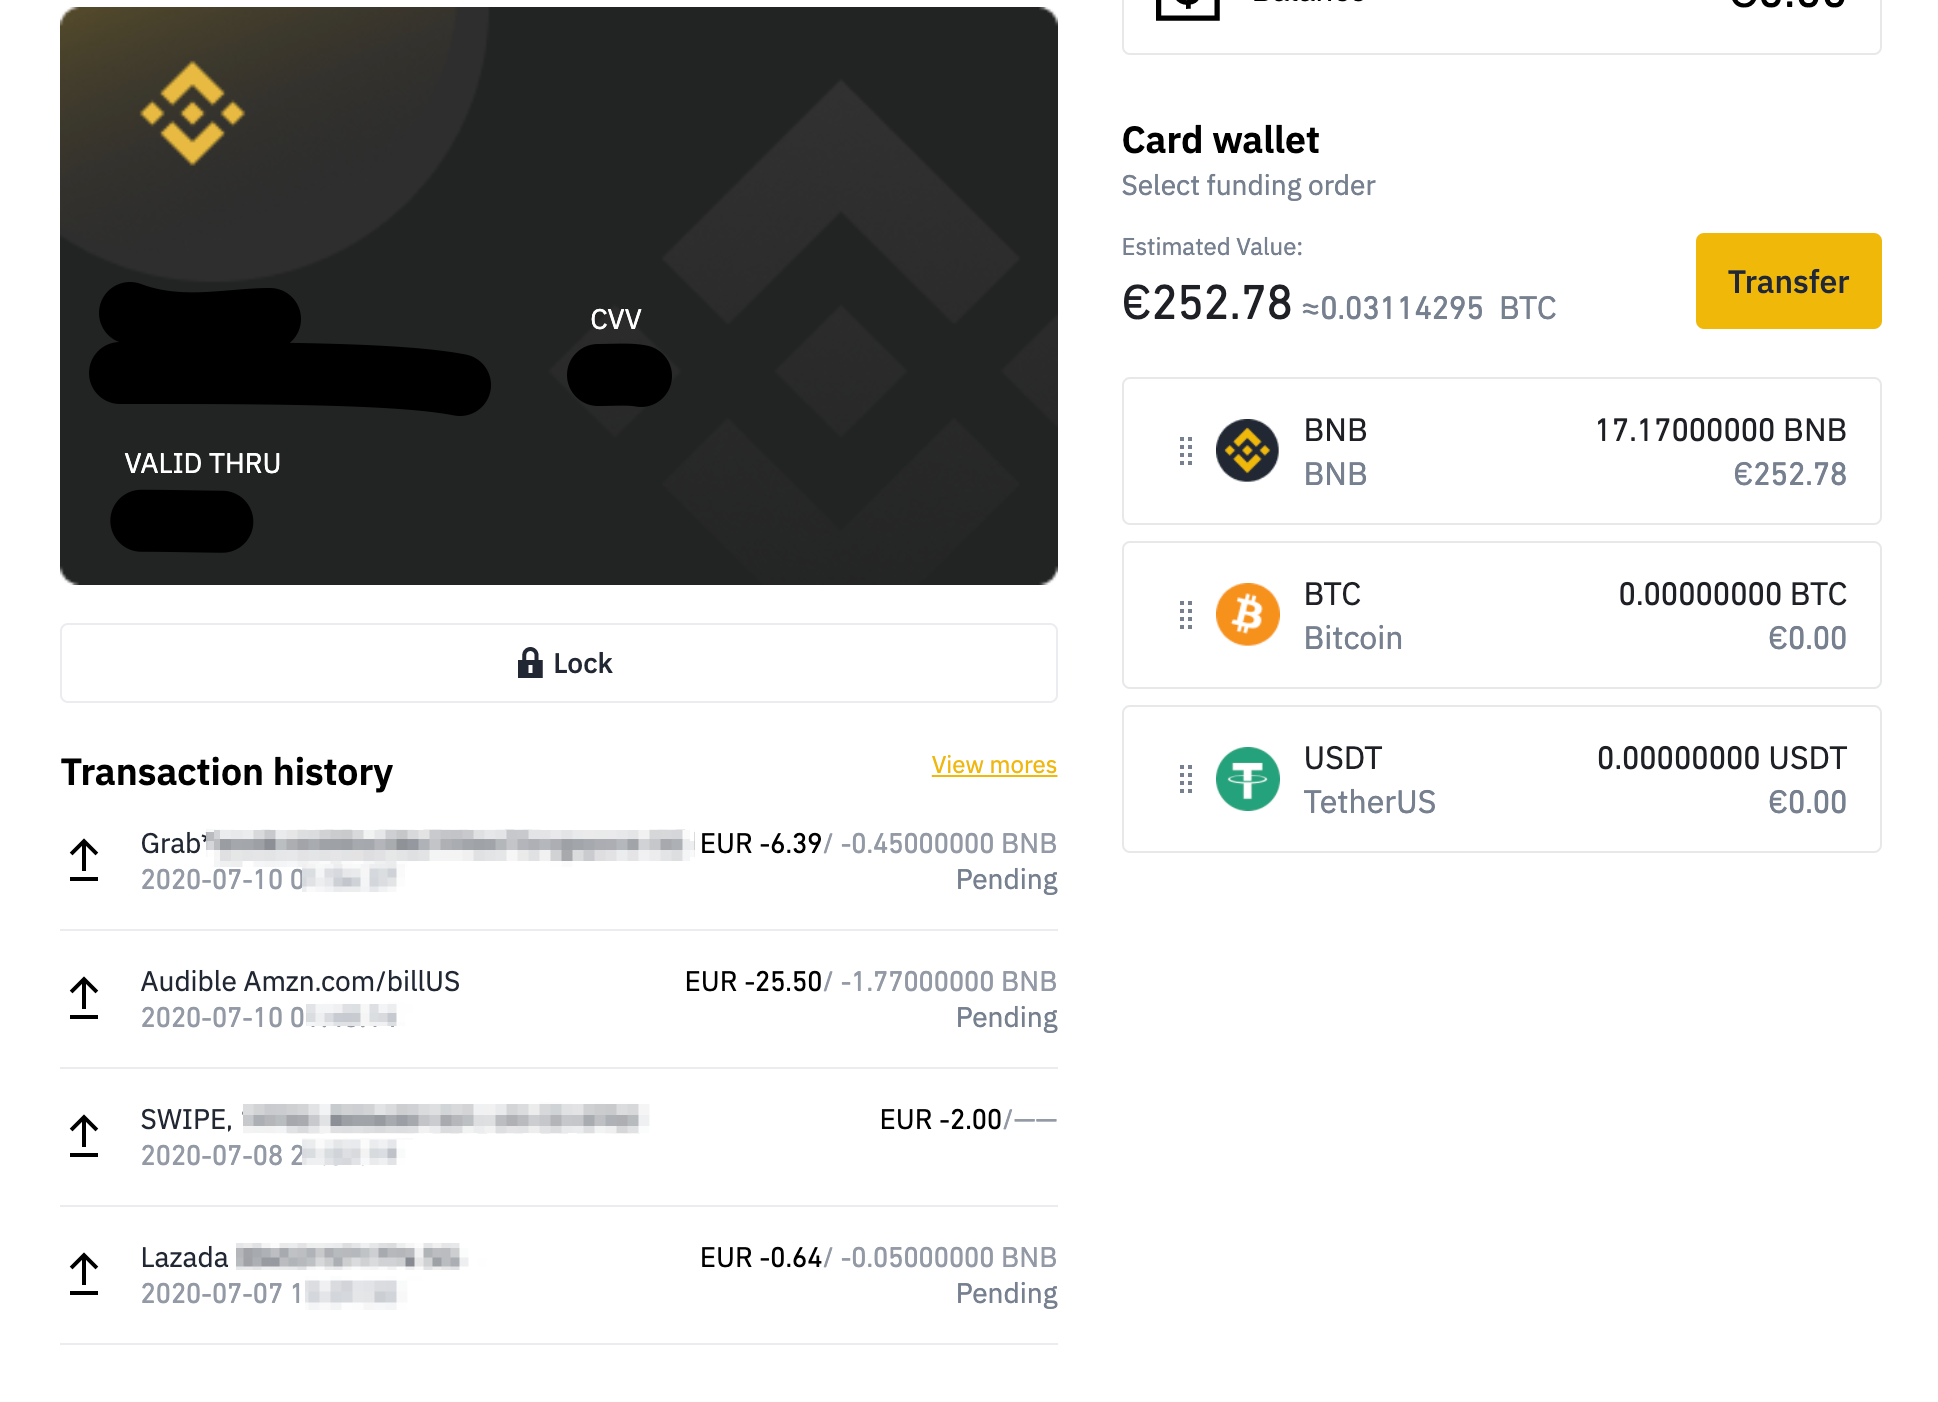 Changpeng Zhao demonstrates the use of the Binance Card through his Twitter account.